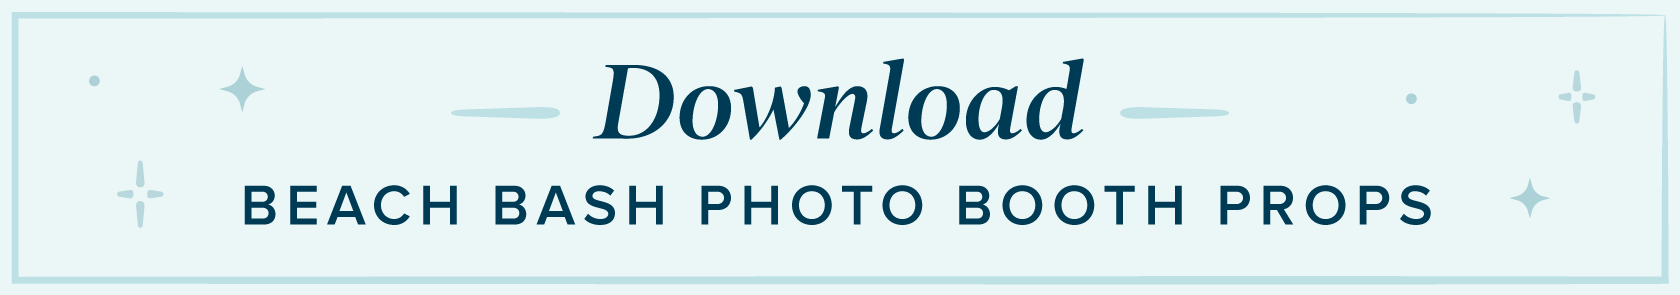 Beach Bash Photo Booth Props Download Button